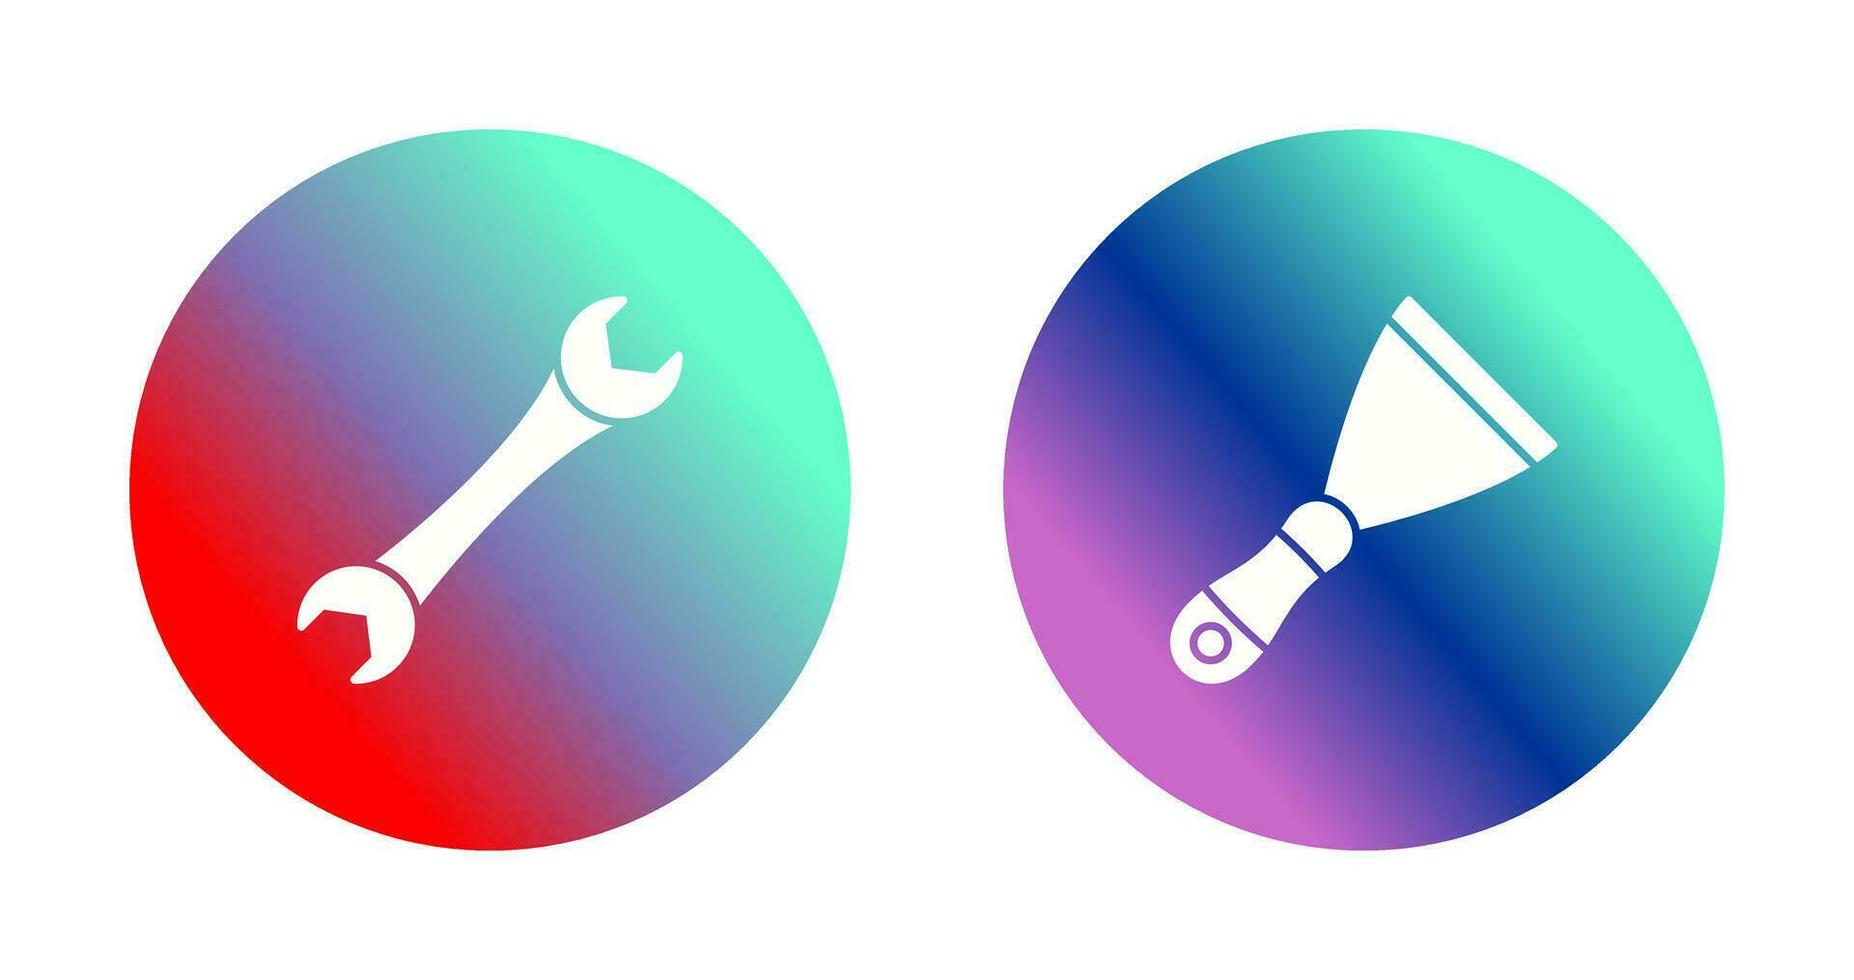 Spanner and Spatula Icon vector